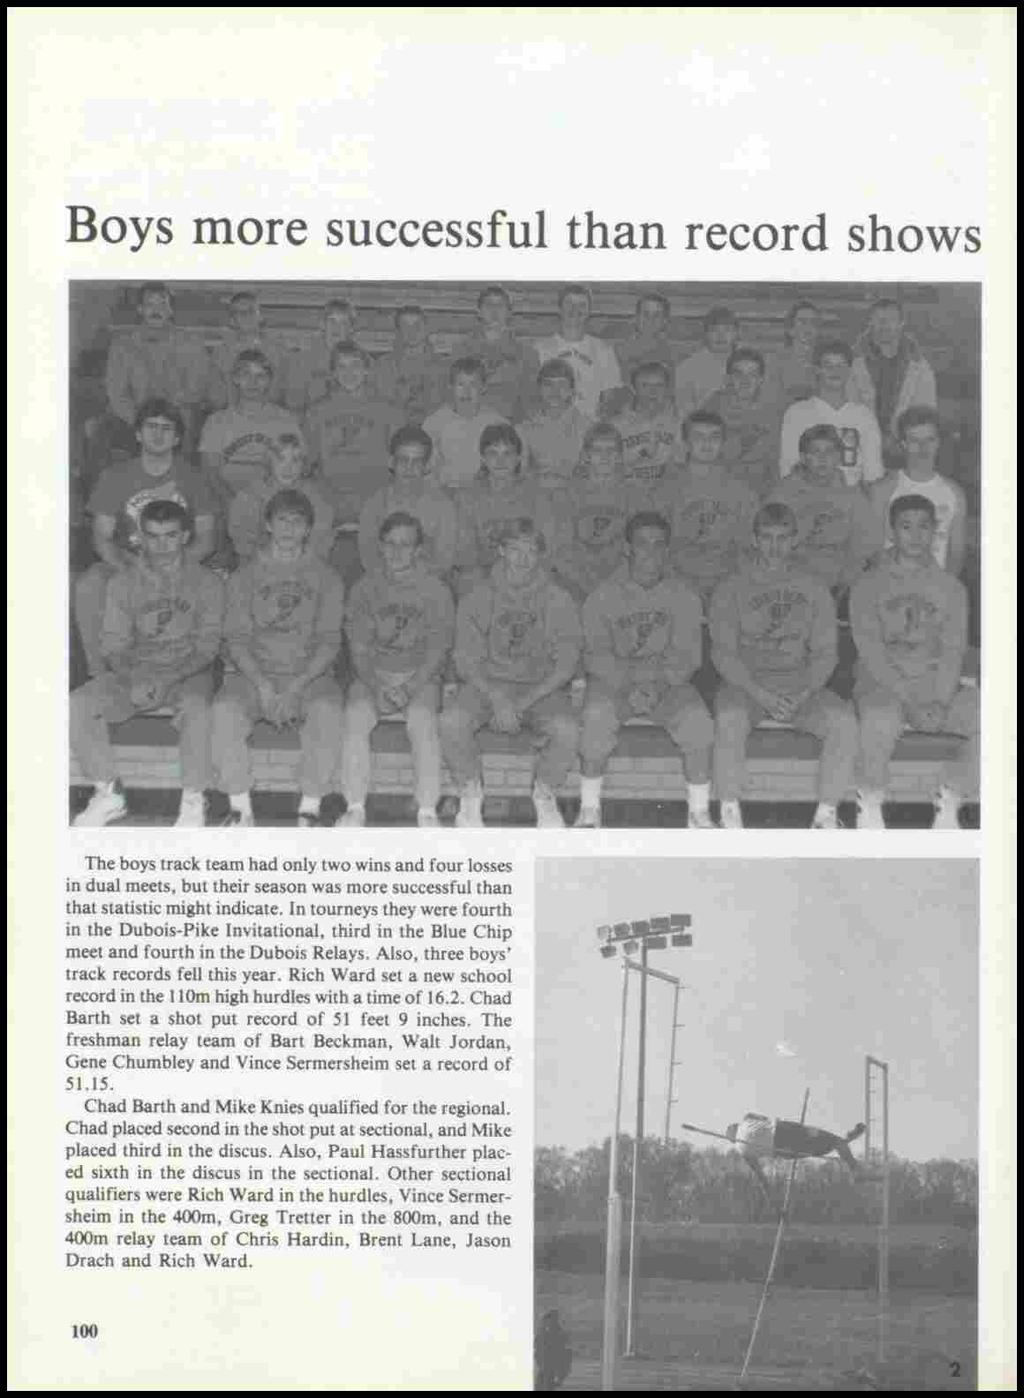 Boys more successful than record shows The boys track team had only two wins and four losses in dual meets, but their season was more successful than that statistic might indicate.